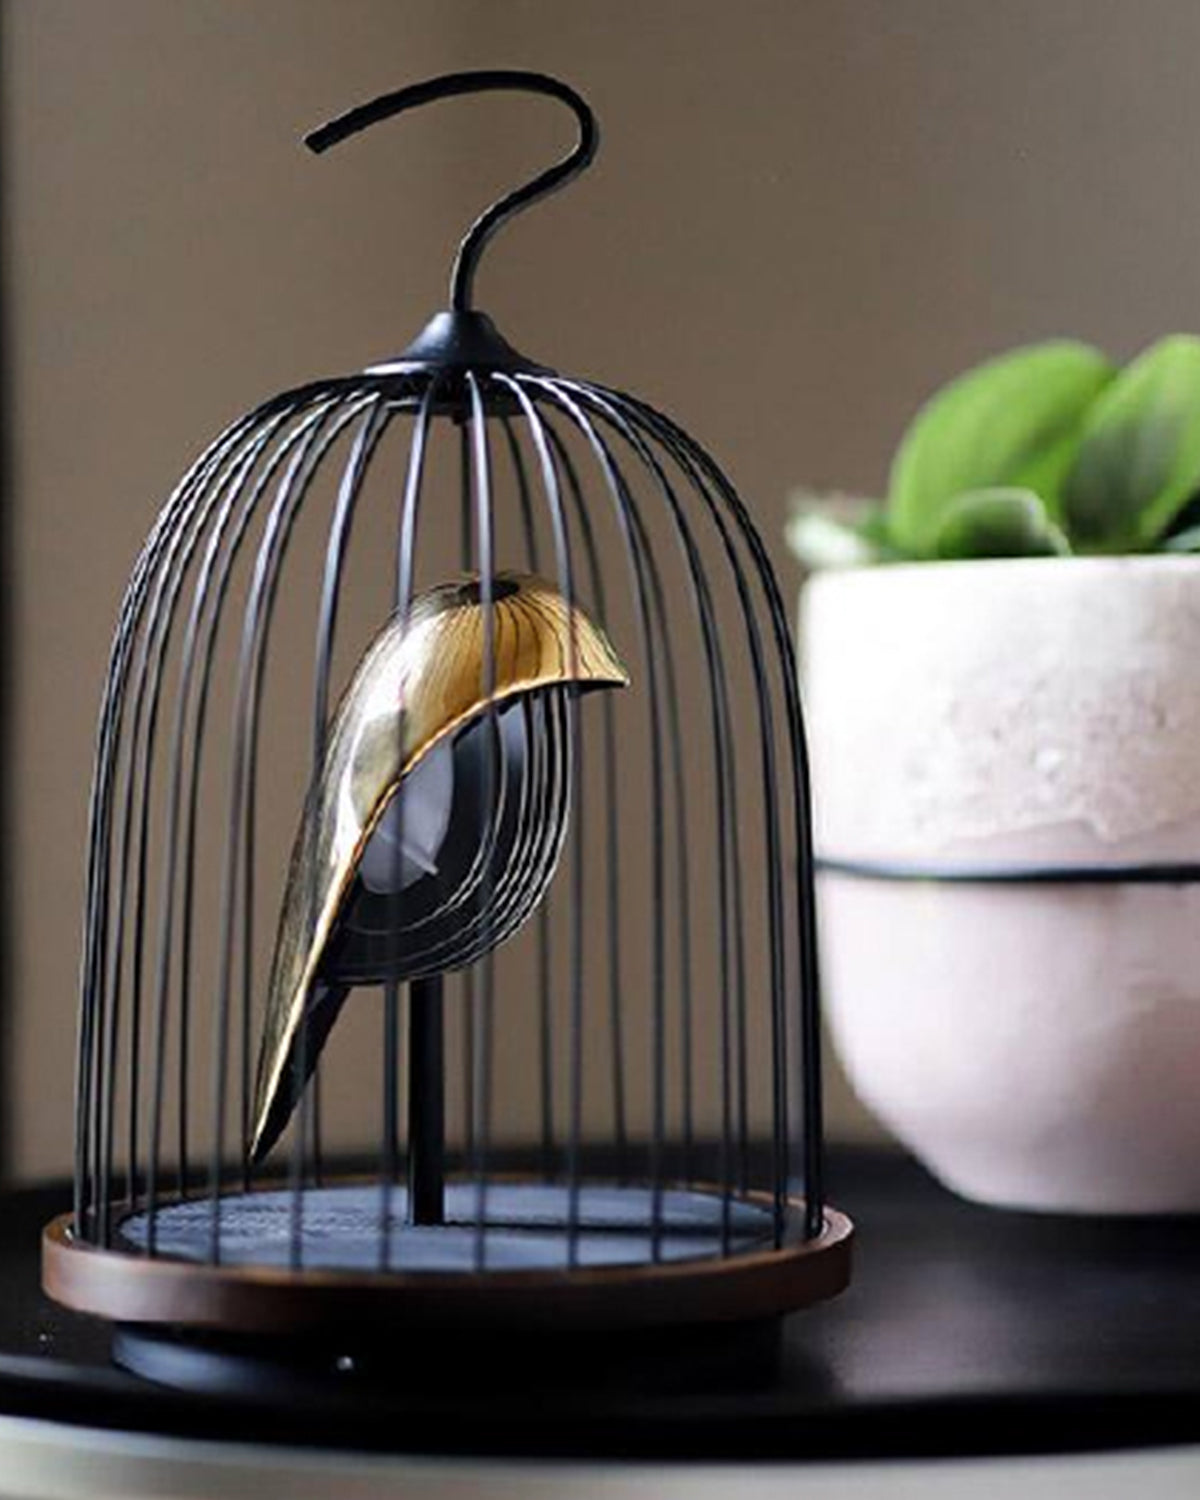 Daqi Bluetooth Speaker and Light gold porcelain bird gold accents black cage and walnut color speaker base